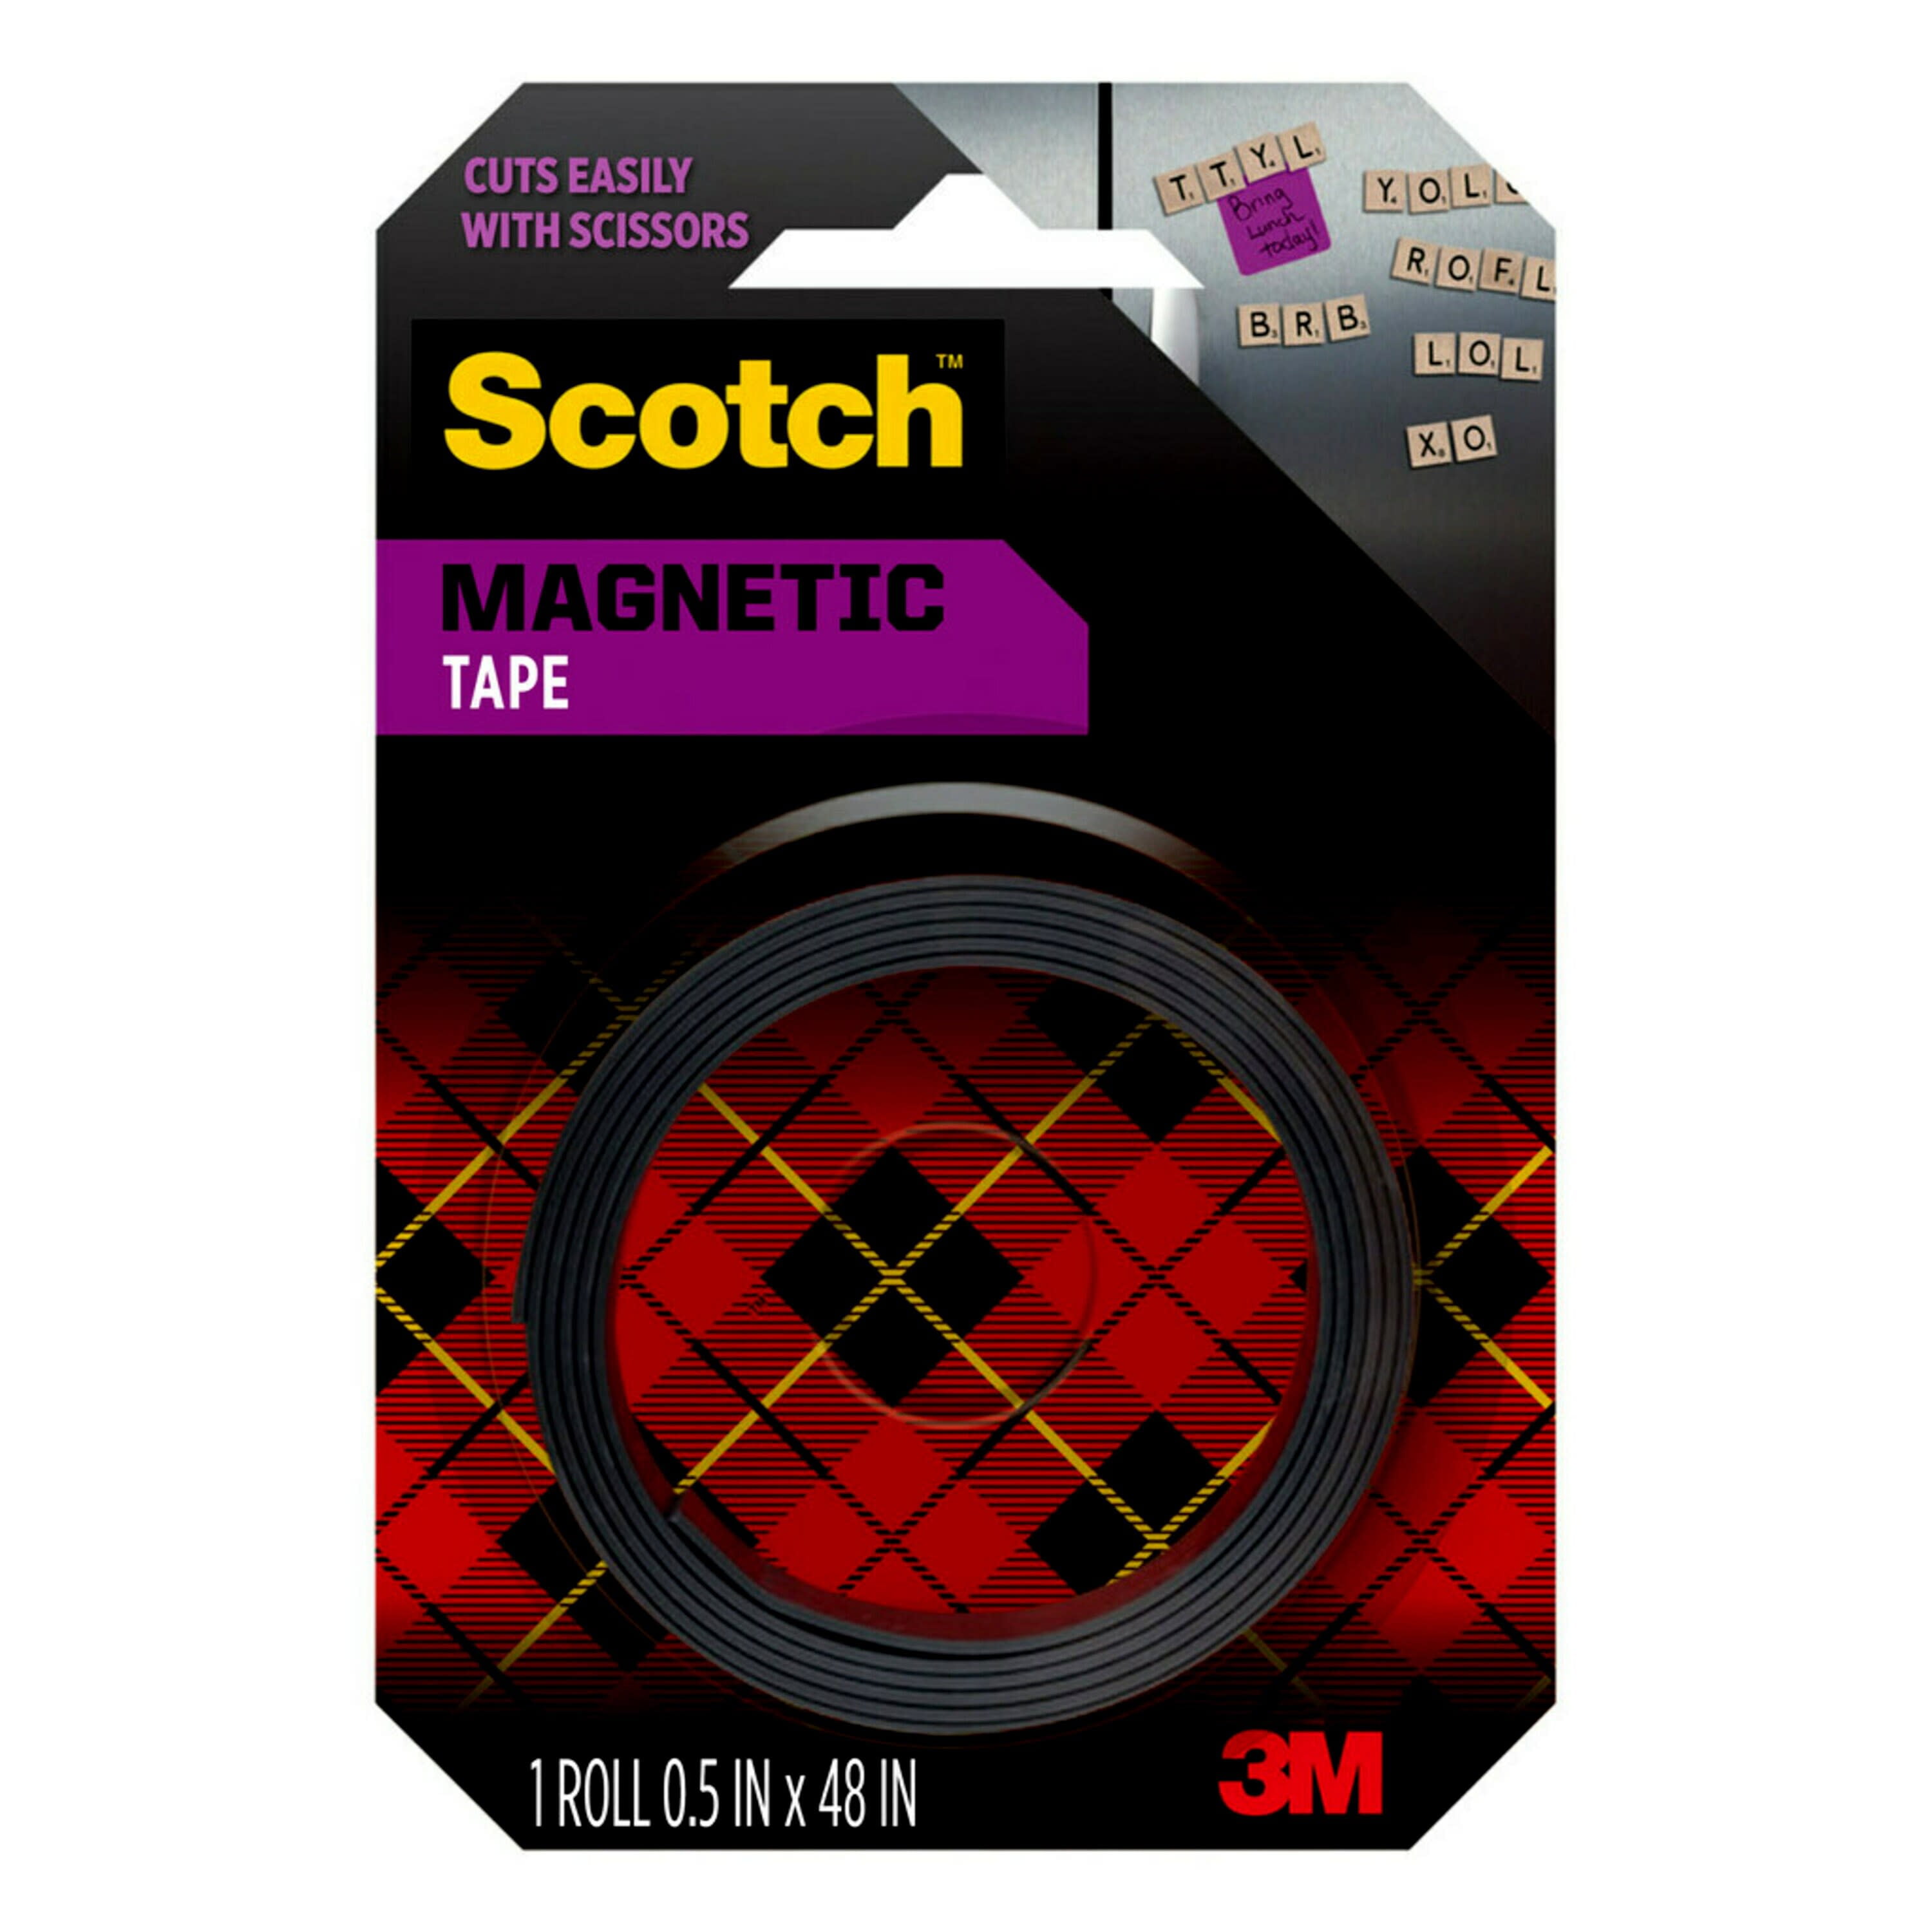 1/2 x 30 Magnetic Tape Roll